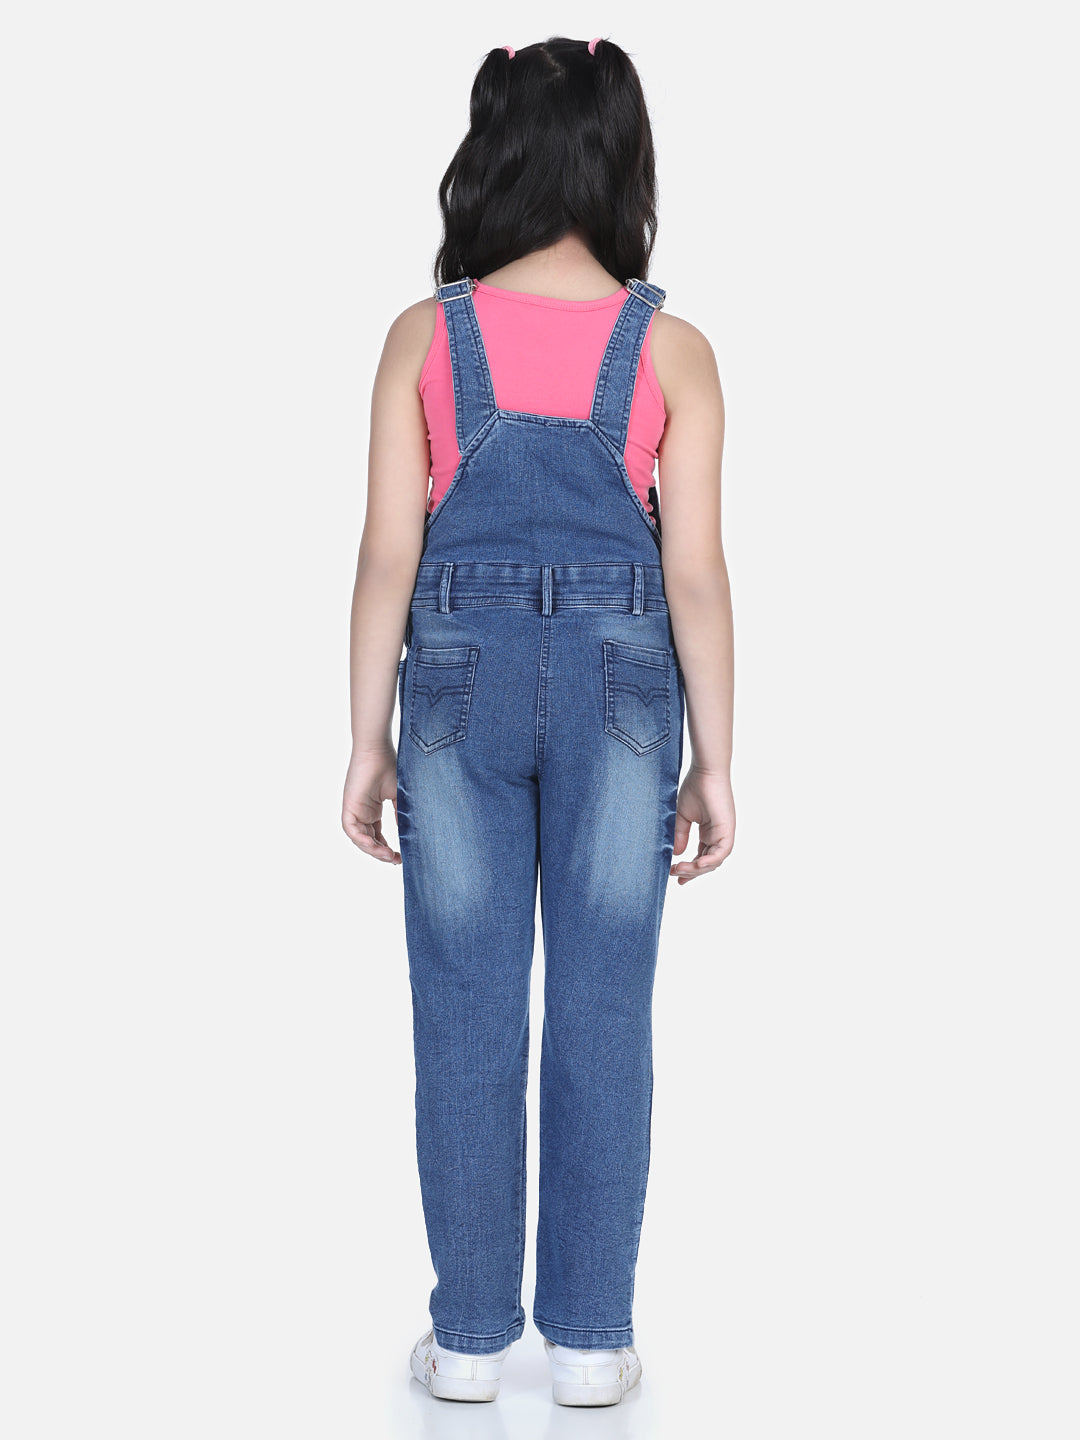 Girls Denim Dungaree with washed effect (T-shirt not included)